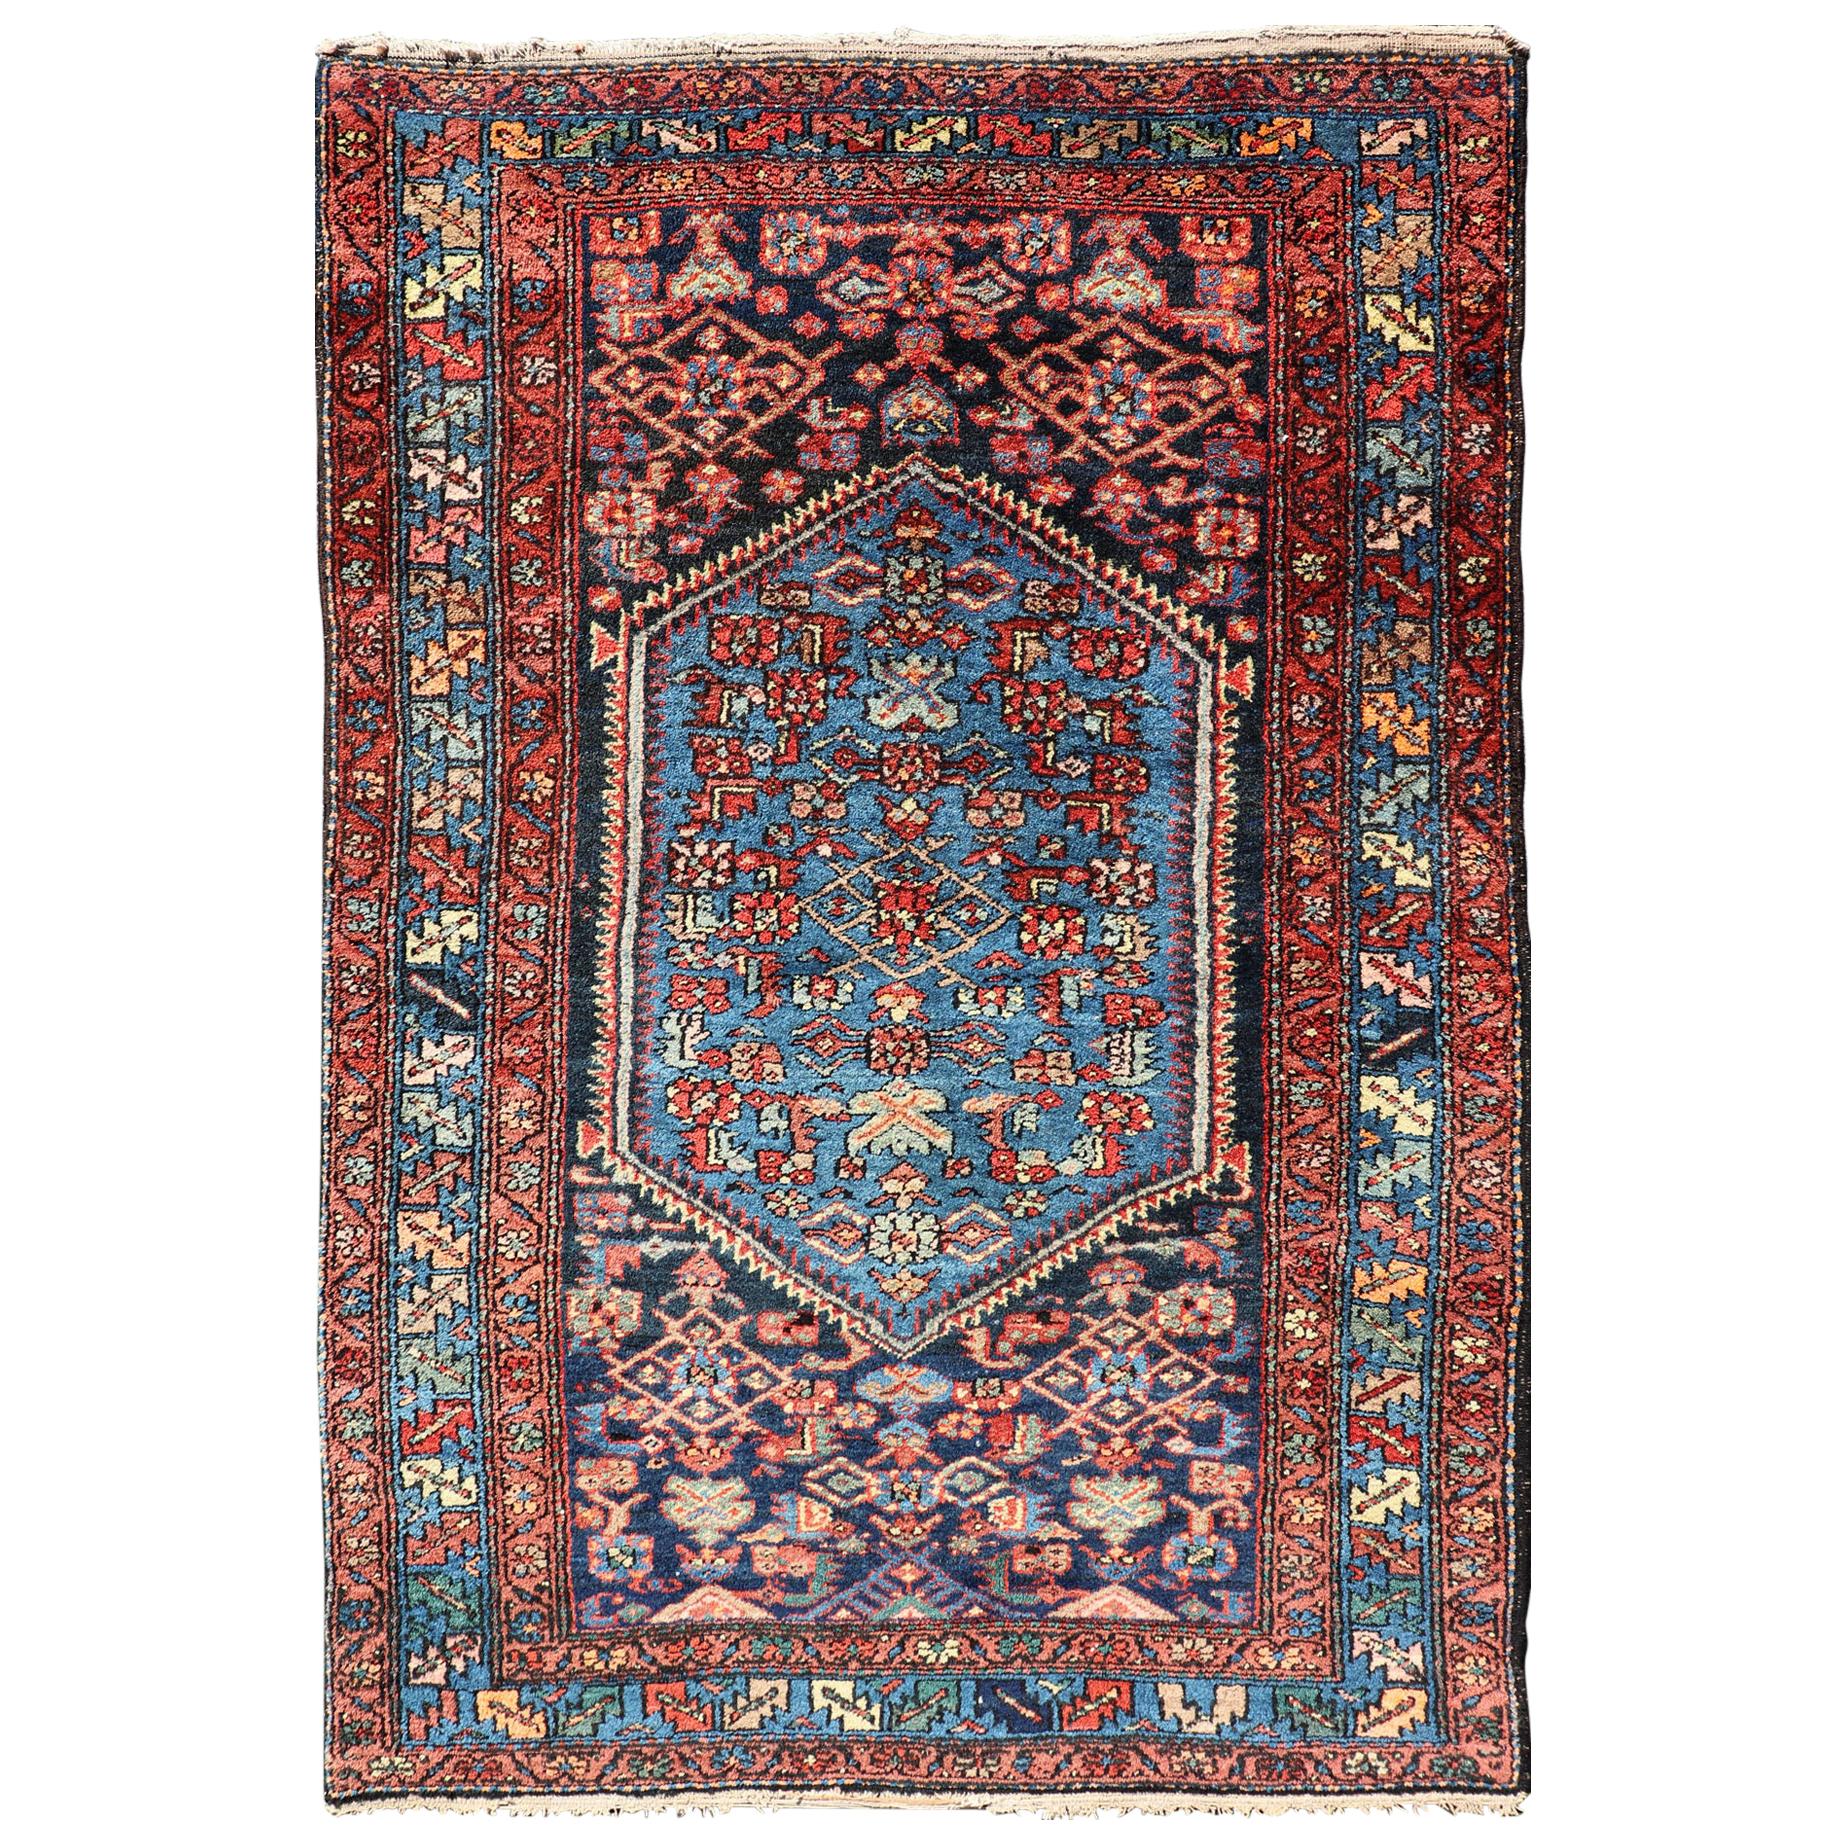 Antique Persian Bidjar Carpet with Variety of Blue Colors, Red, and Salmon